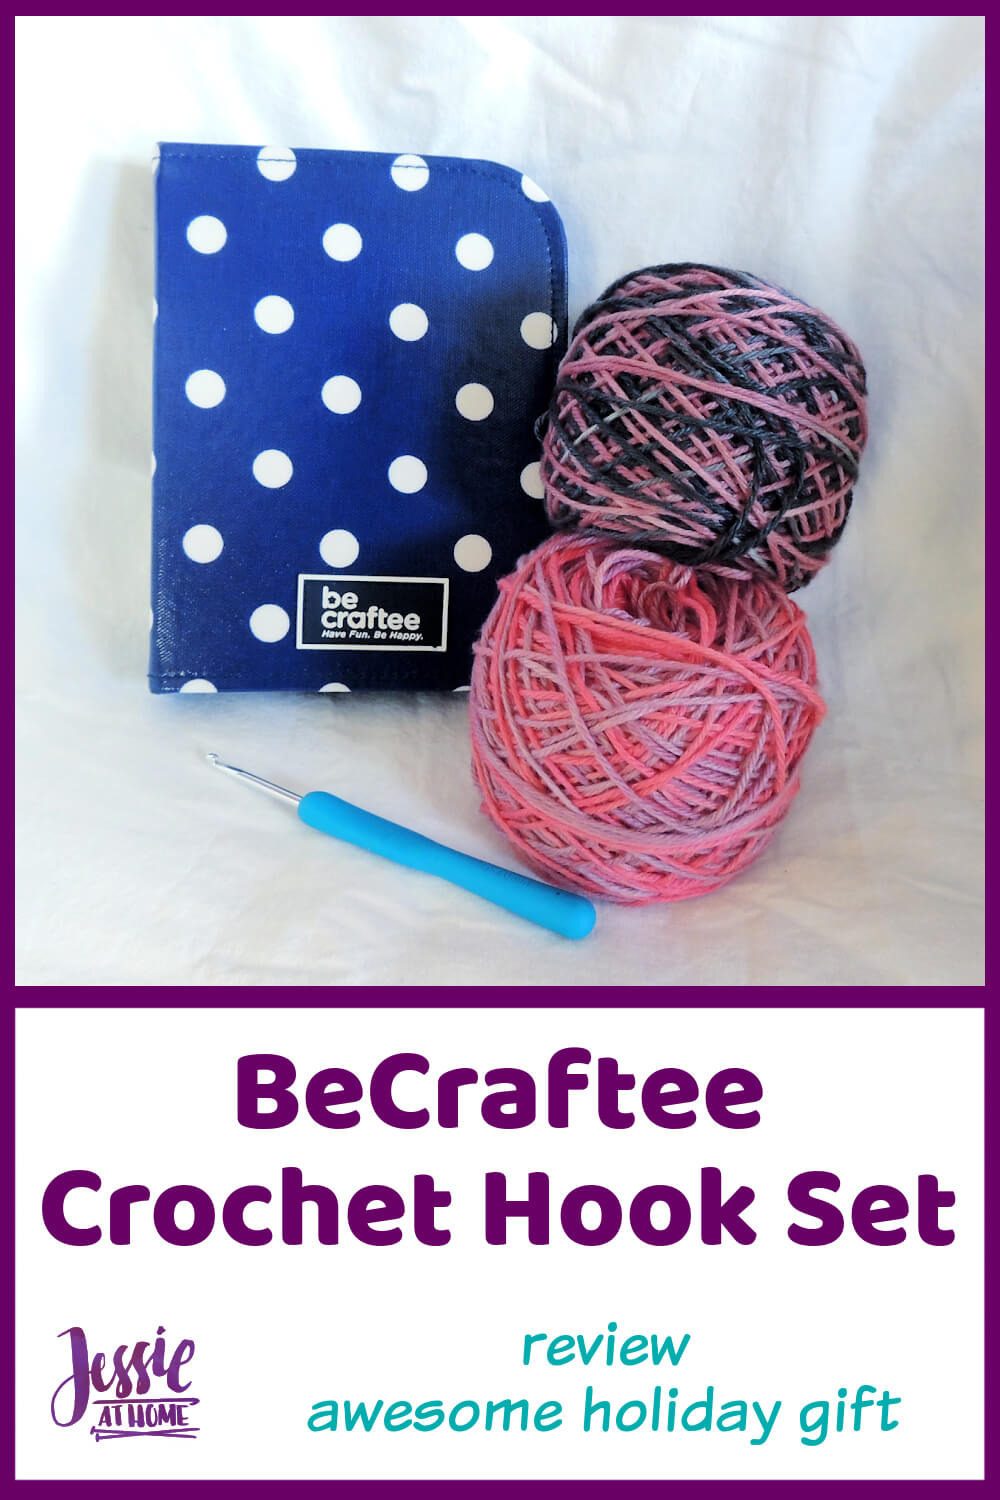 BeCraftee Crochet Hook Set - Awesome Holiday Gift!